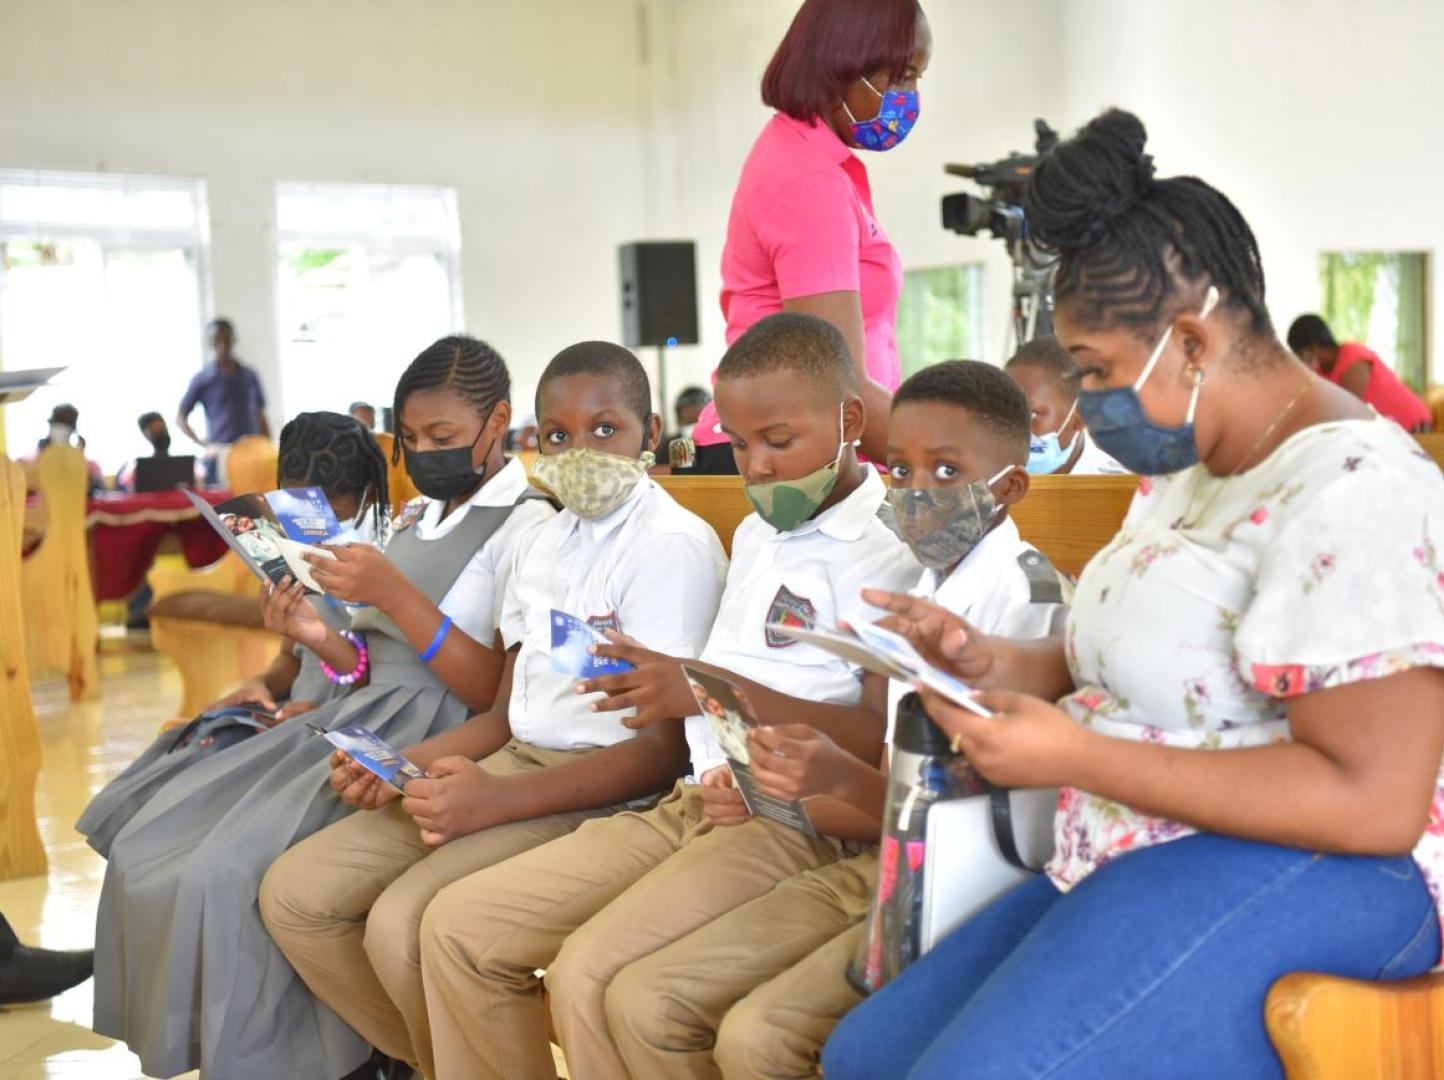 Young students seated with masks on with their teacher on a bench reading books.